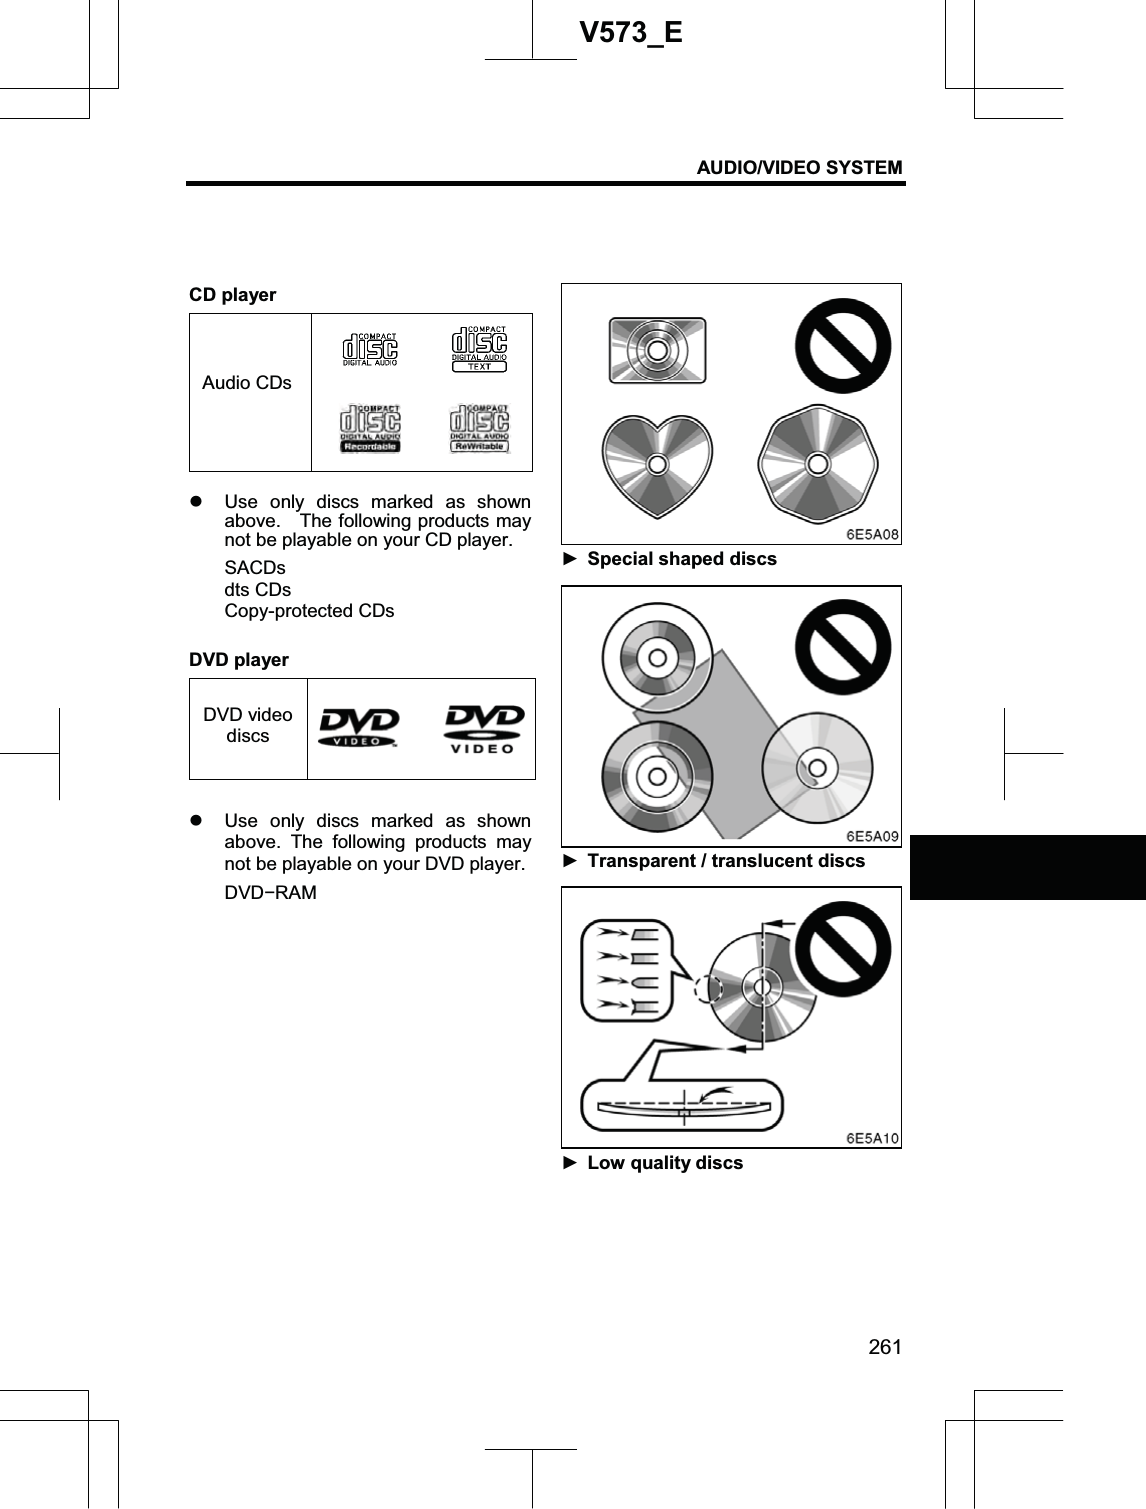 AUDIO/VIDEO SYSTEM 261V573_ECD player Audio CDsz Use only discs marked as shown above.    The following products may not be playable on your CD player. SACDs dts CDs Copy-protected CDs DVD player DVD video discs z Use only discs marked as shown above. The following products may not be playable on your DVD player. DVDíRAM ŹSpecial shaped discs ŹTransparent / translucent discs ŹLow quality discs 